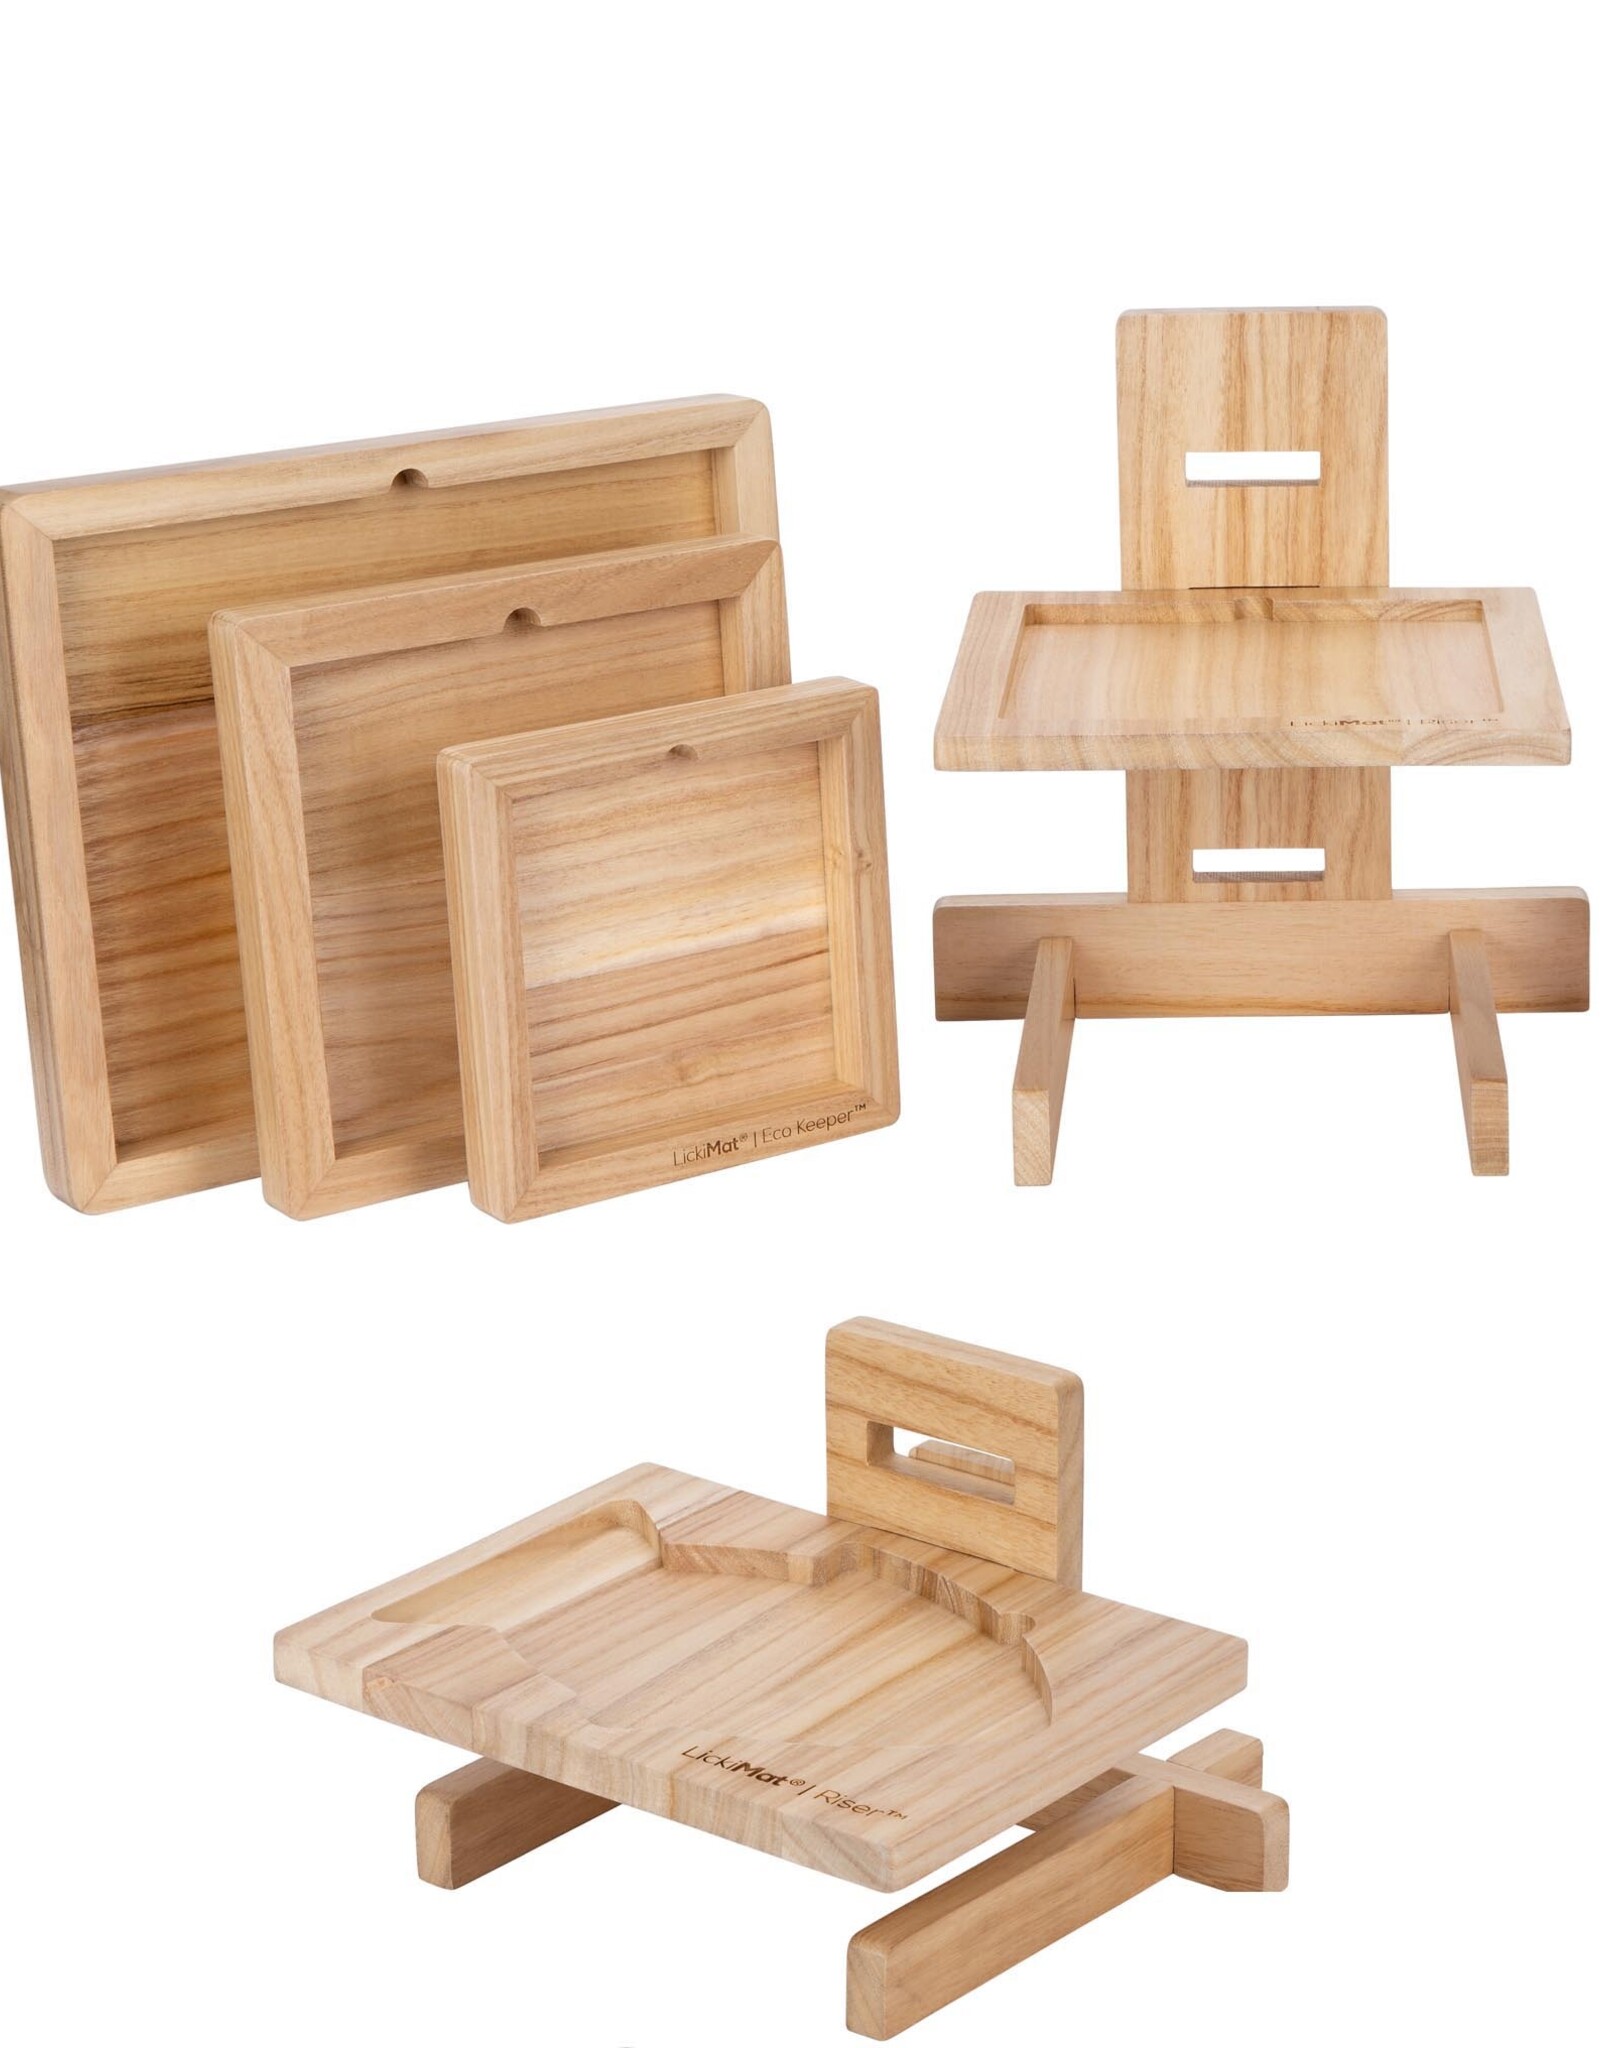 LickiMat LickiMat Eco Wooden Keepers and Risers